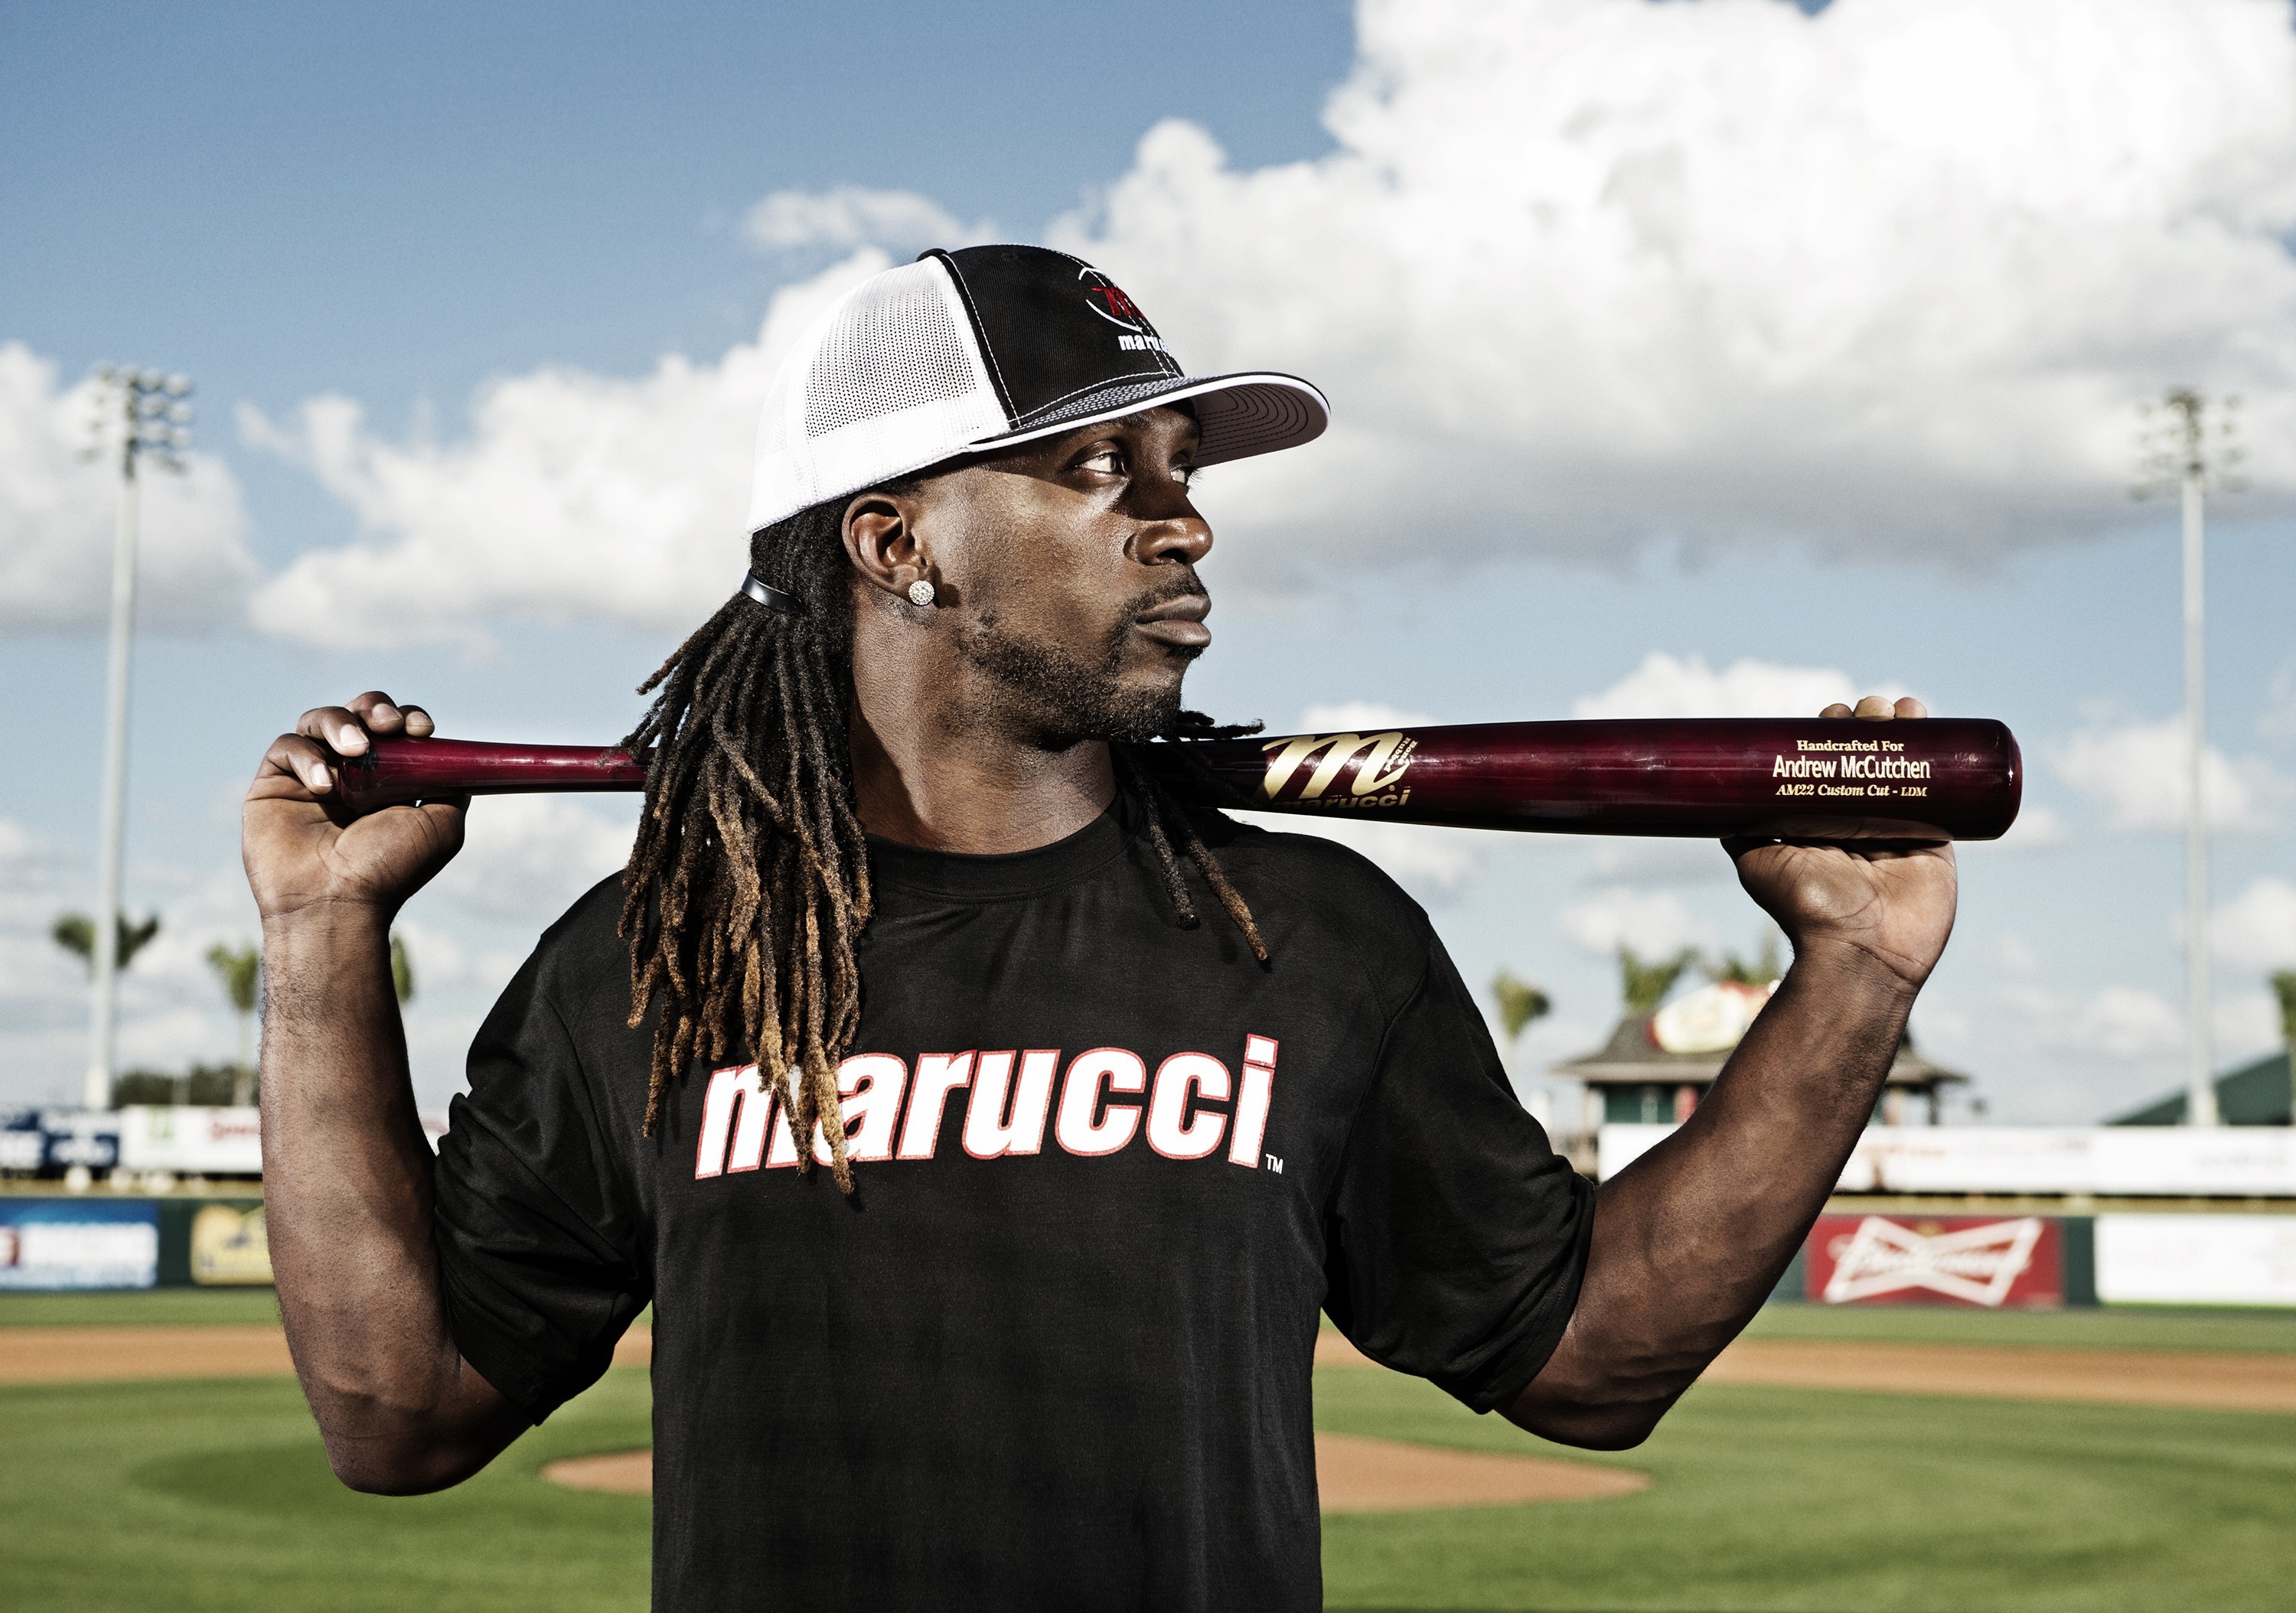 3000x2108 Your Resolution: 1024x1024. Available Resolutions: PC Mac Android iOS  Custom. Tags: Baseball, Andrew McCutchen ...